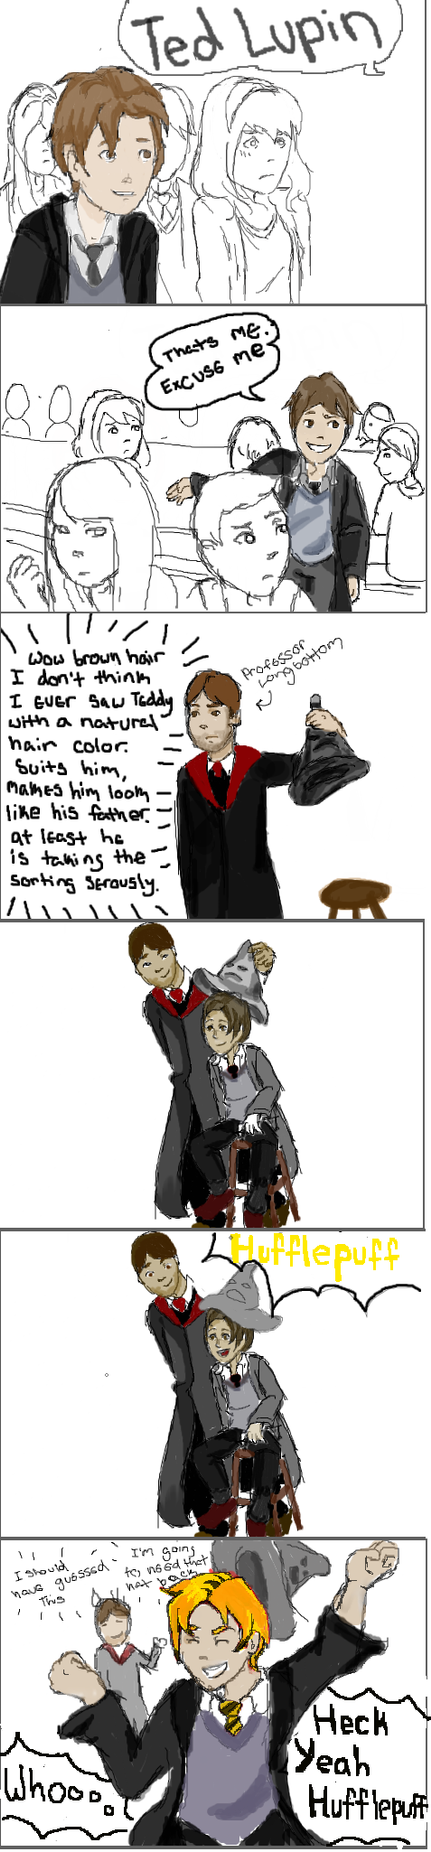 Teddy Lupin and the Sorting by DidxSomeonexSayxMad on DeviantArt